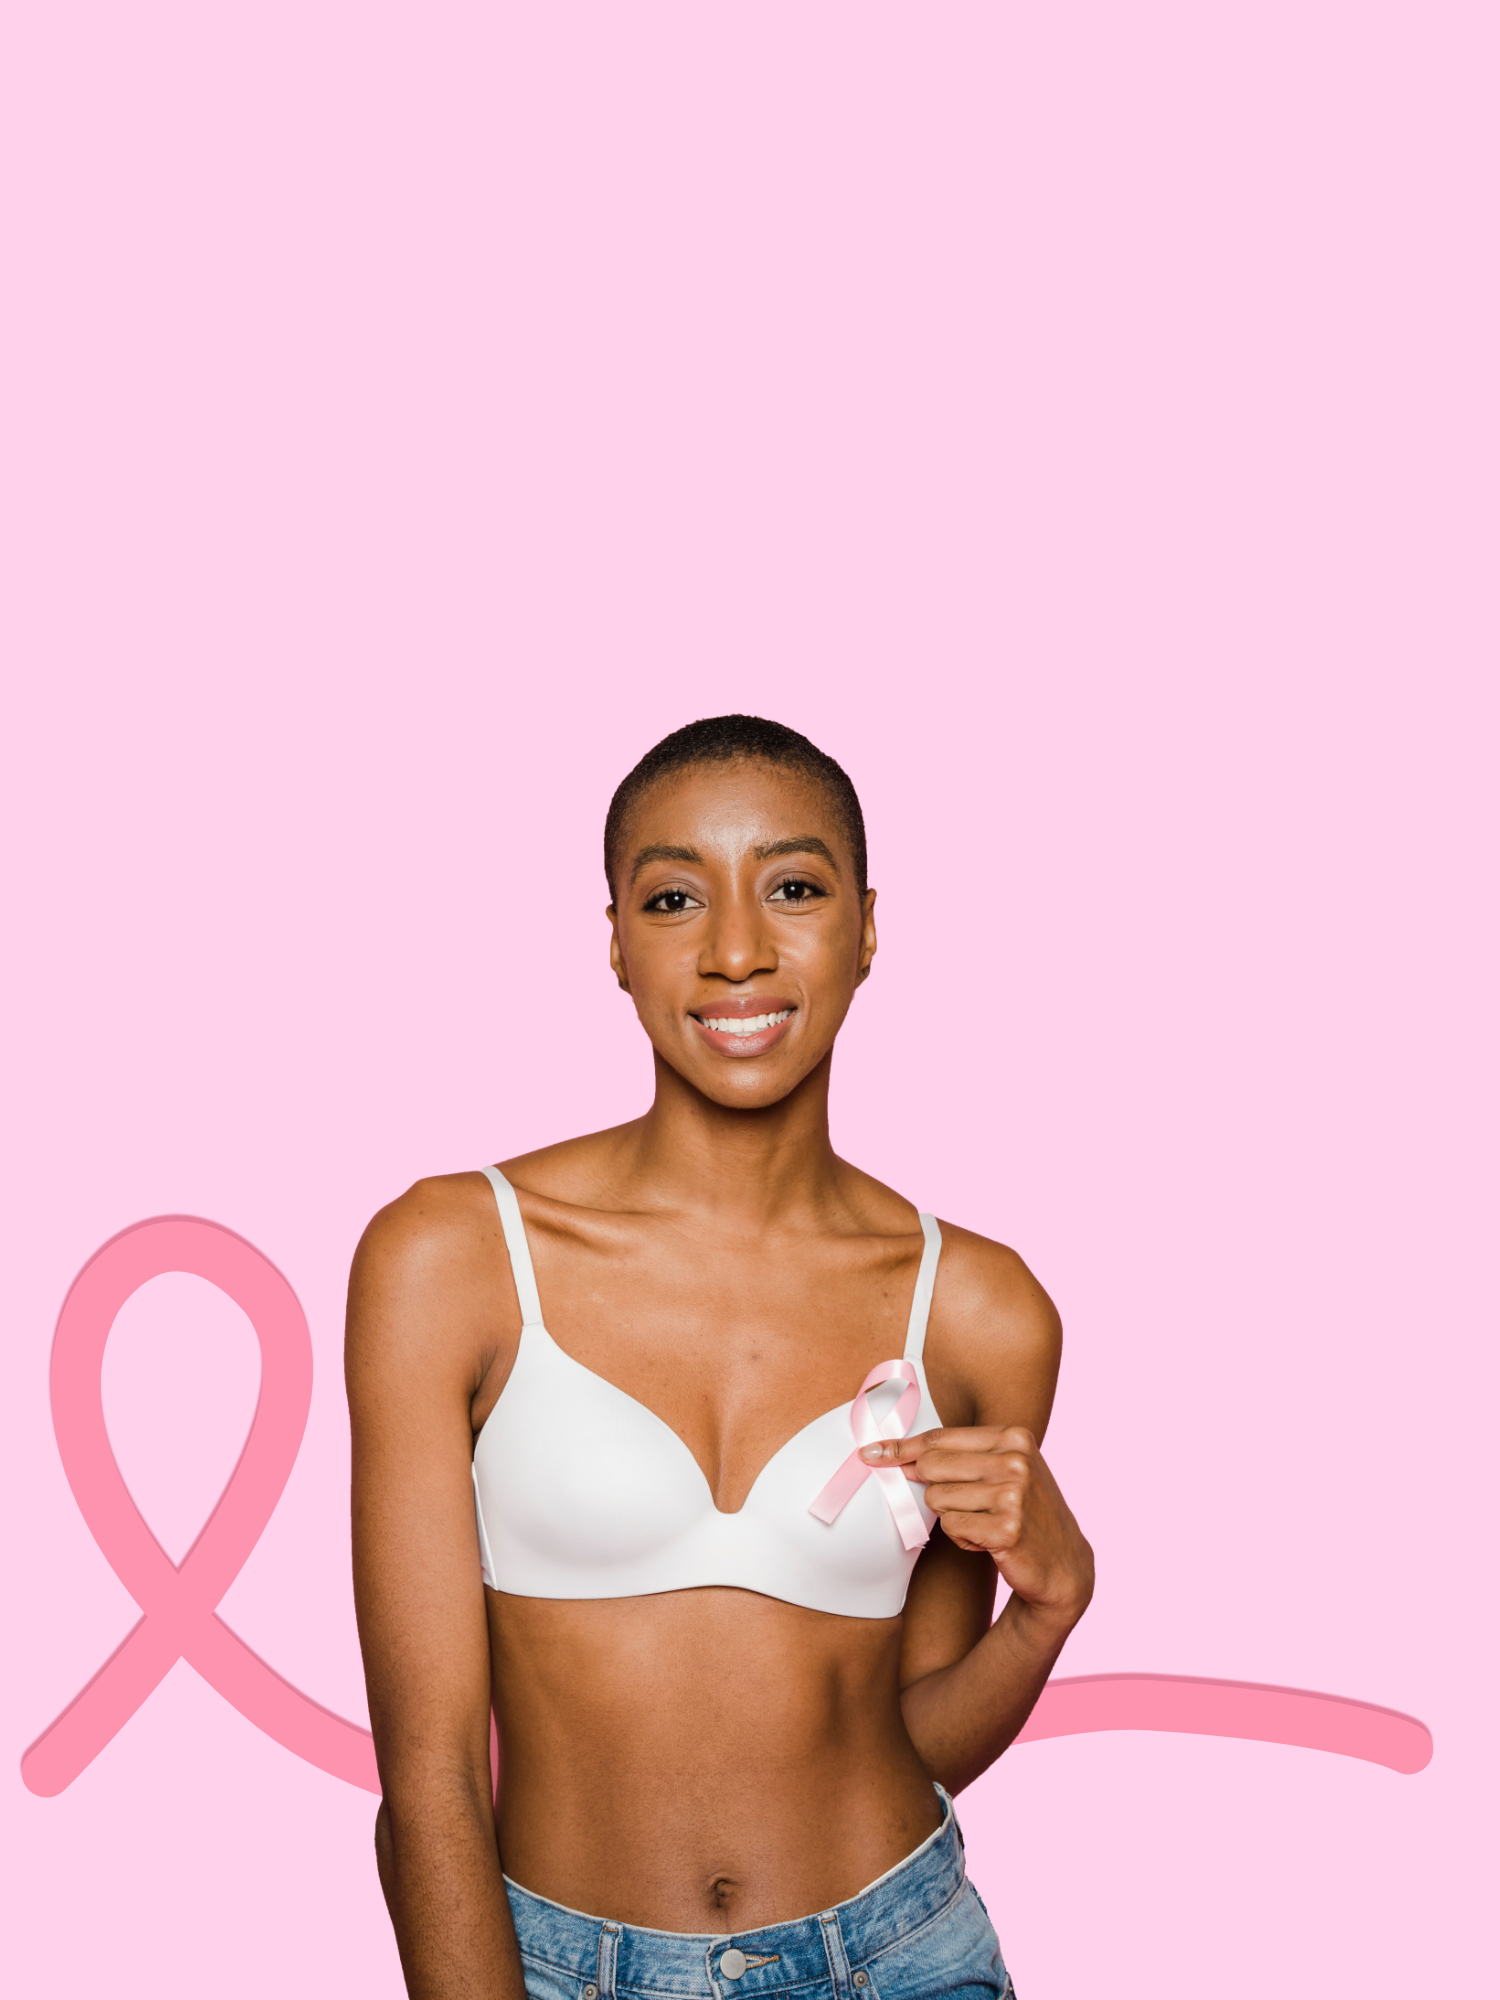 The Best Surgical Bra for Post Breast Cancer Surgery